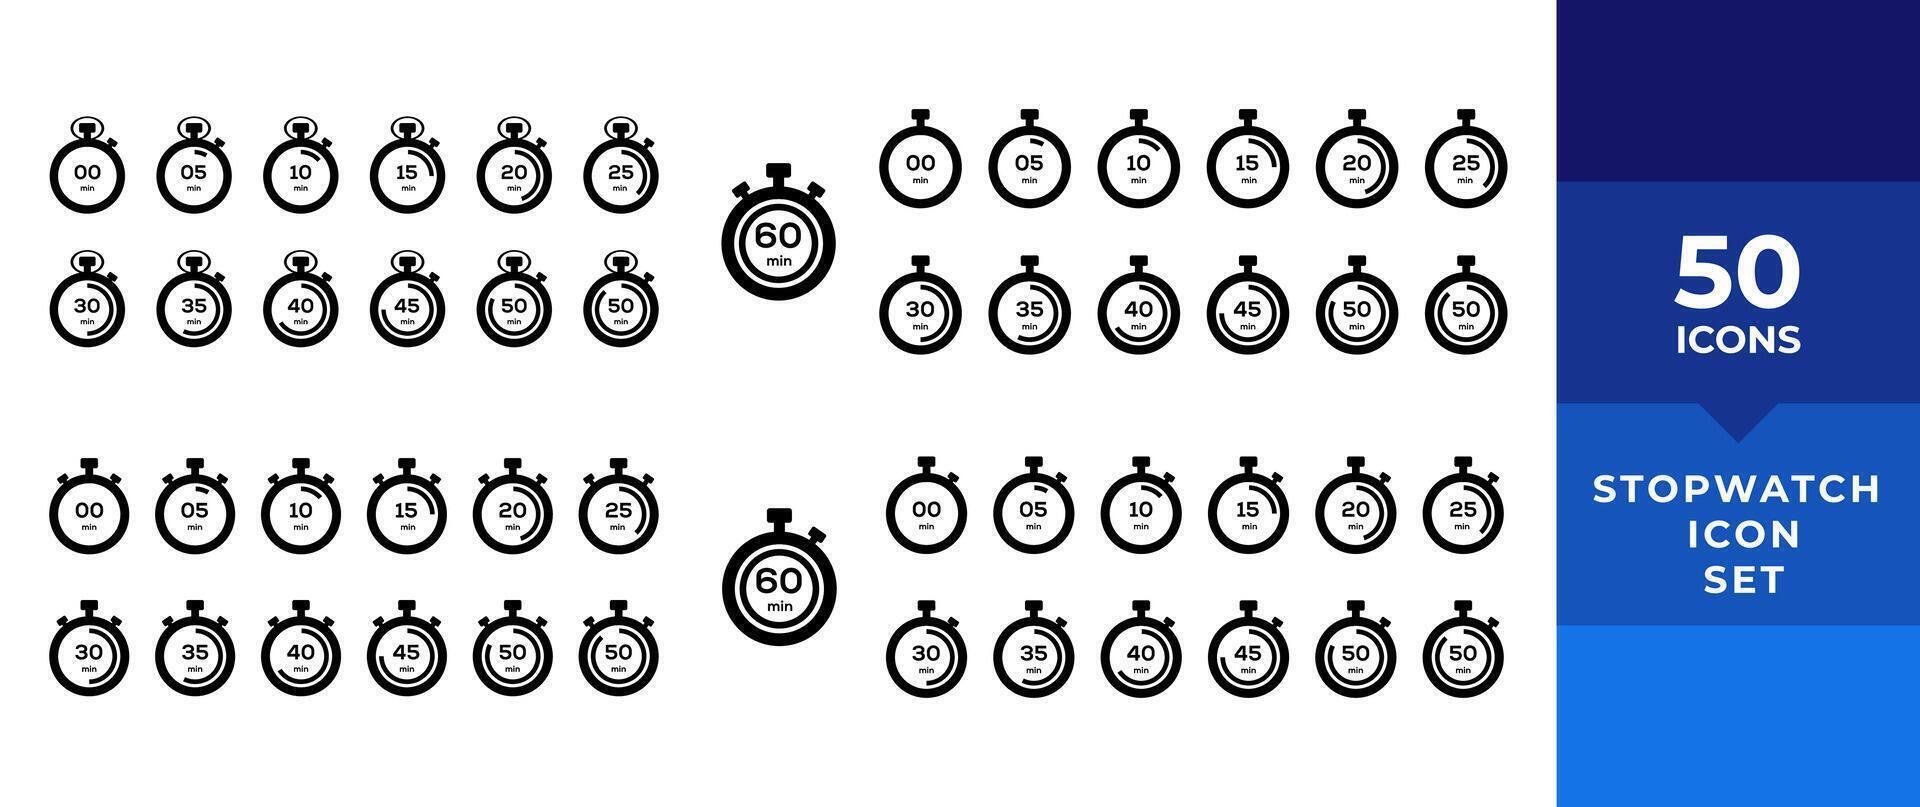 Timer icon set. Stopwatch timer collection. Timer or clock symbol. Countdown circle clock counter timer. Fast time icons - stock vector